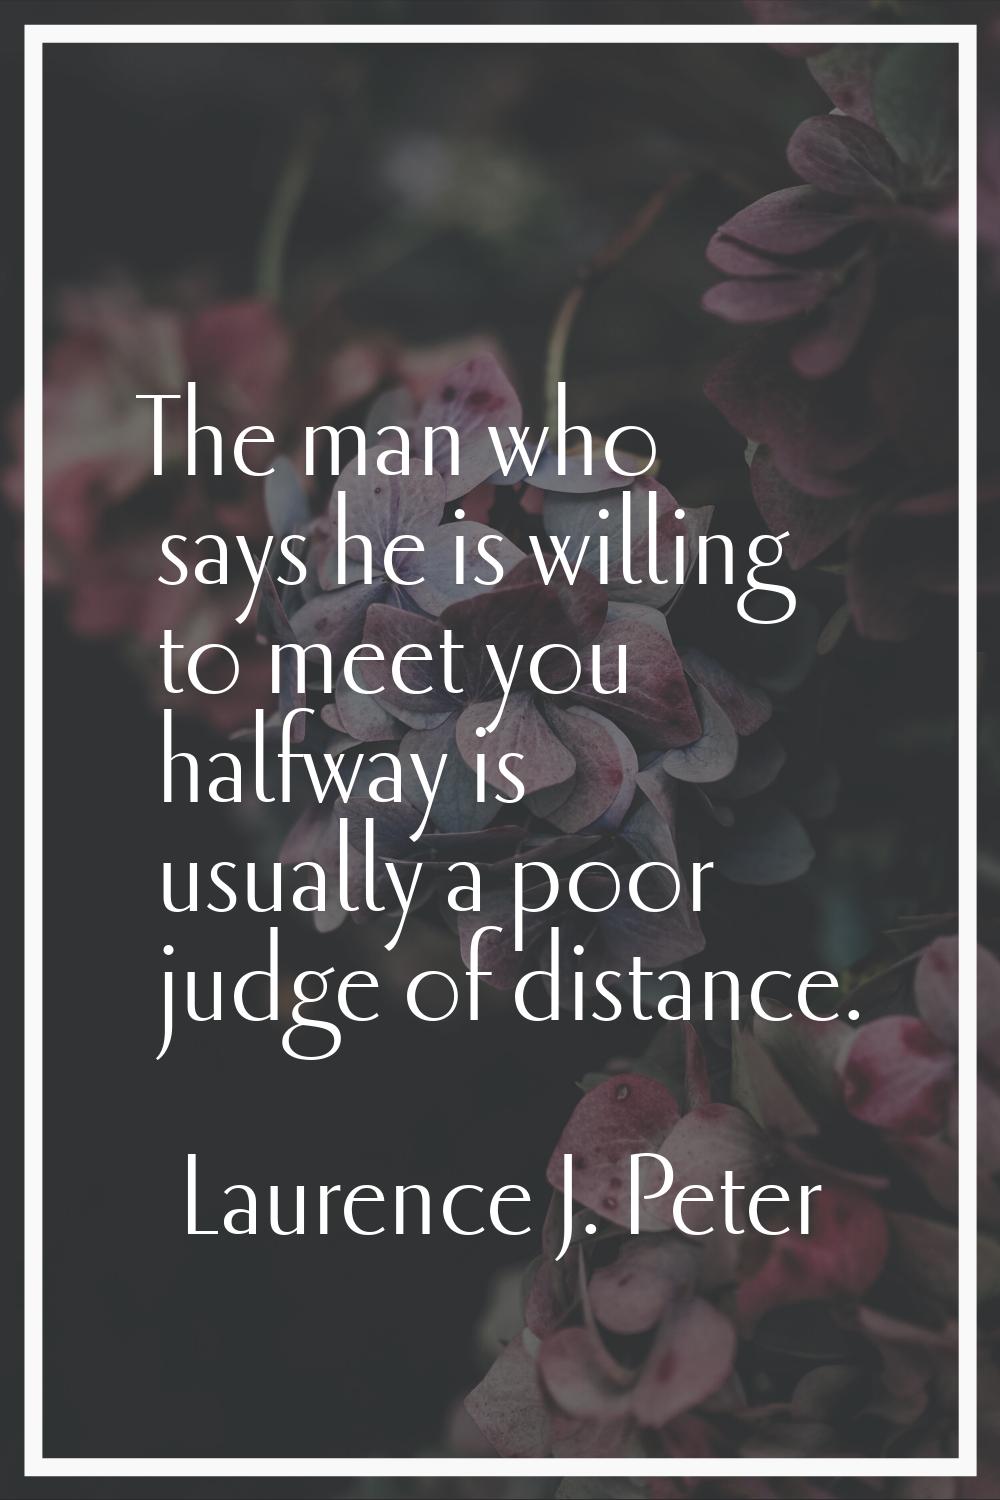 The man who says he is willing to meet you halfway is usually a poor judge of distance.